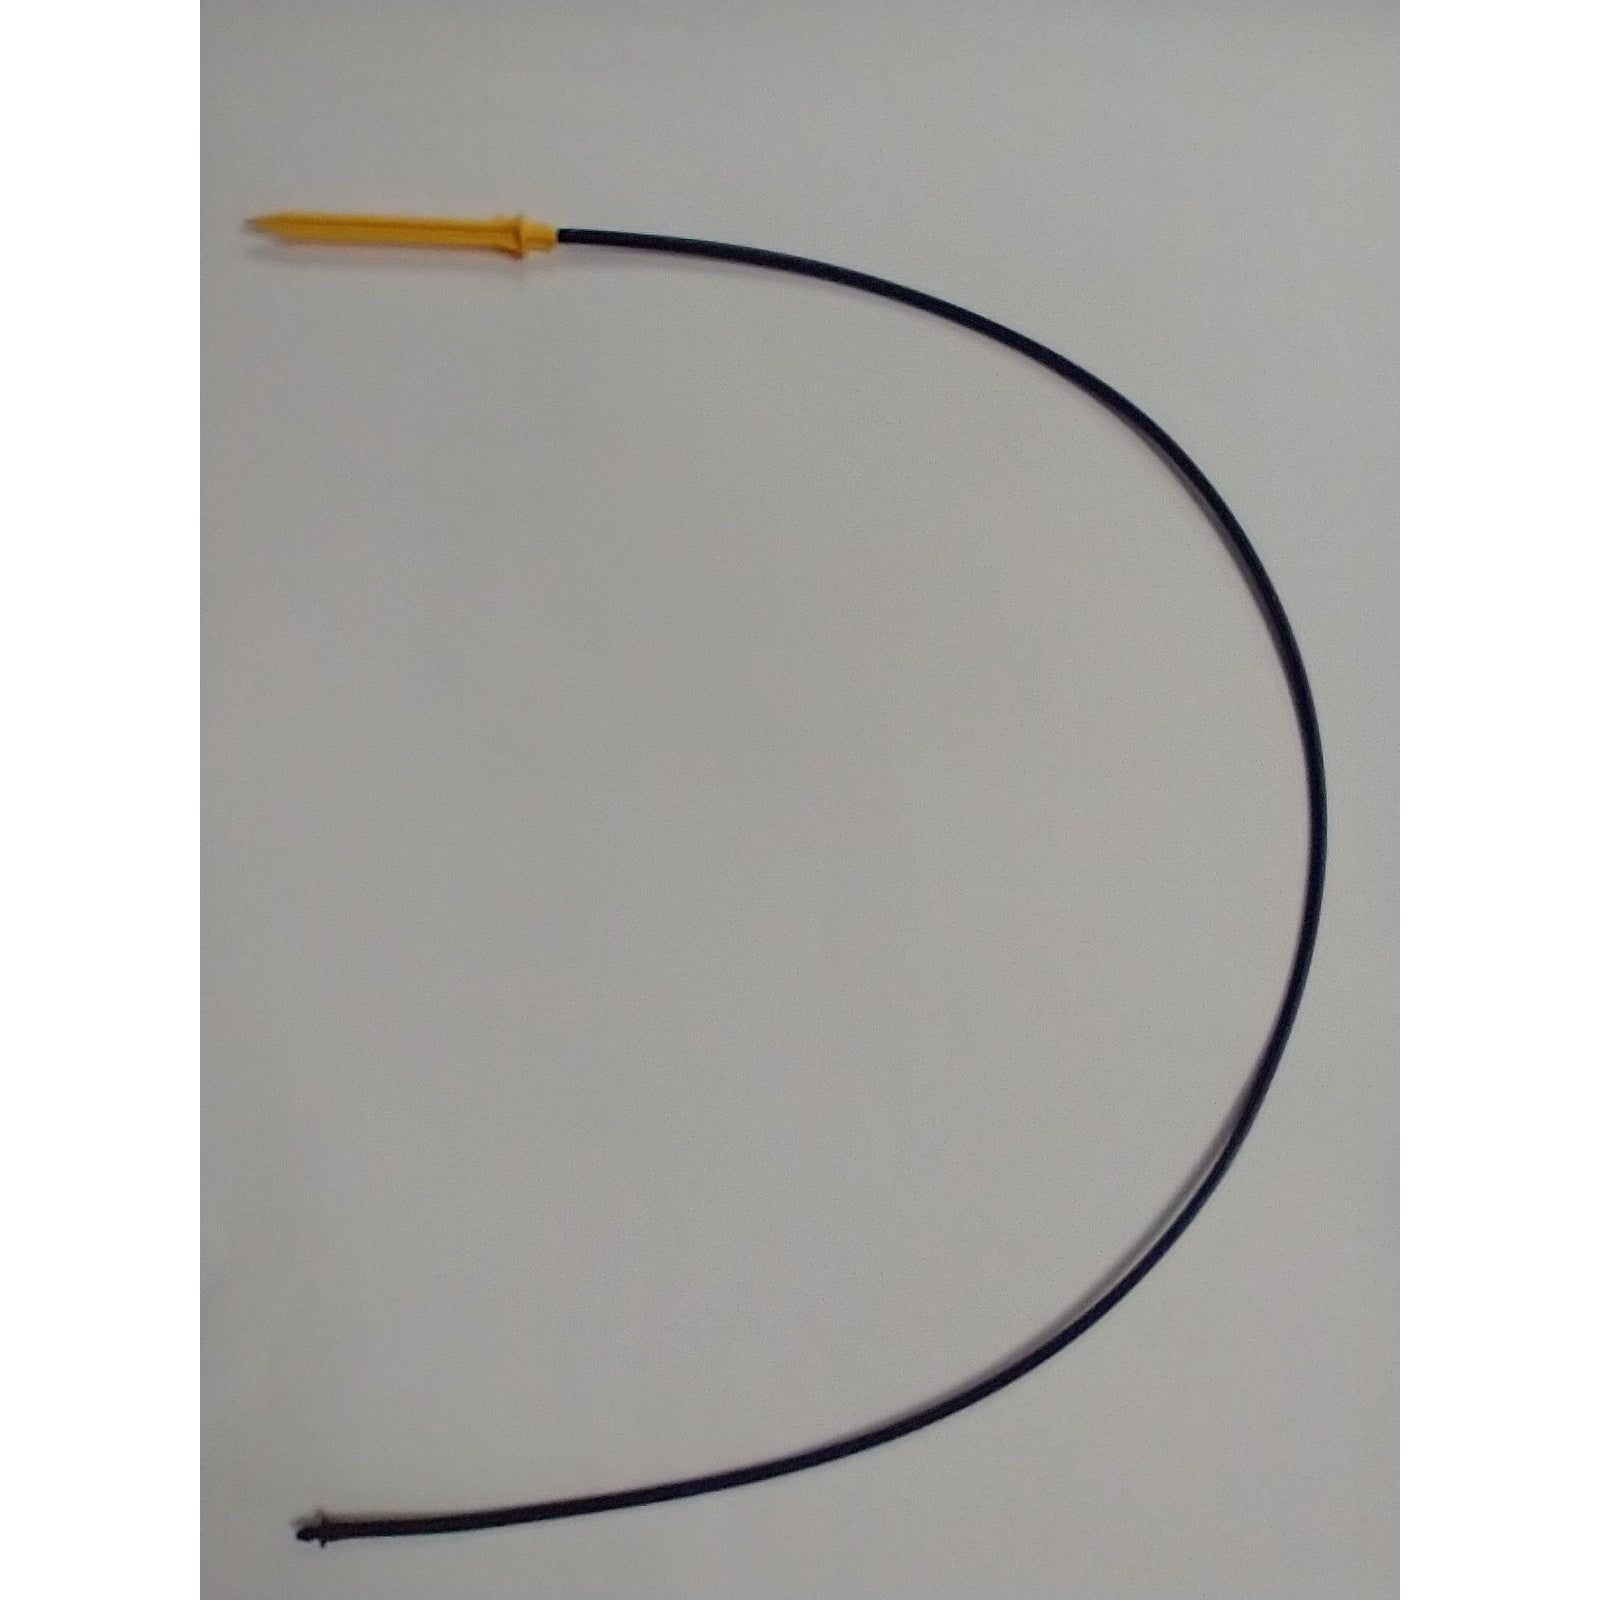 a black and yellow wire with a yellow tip